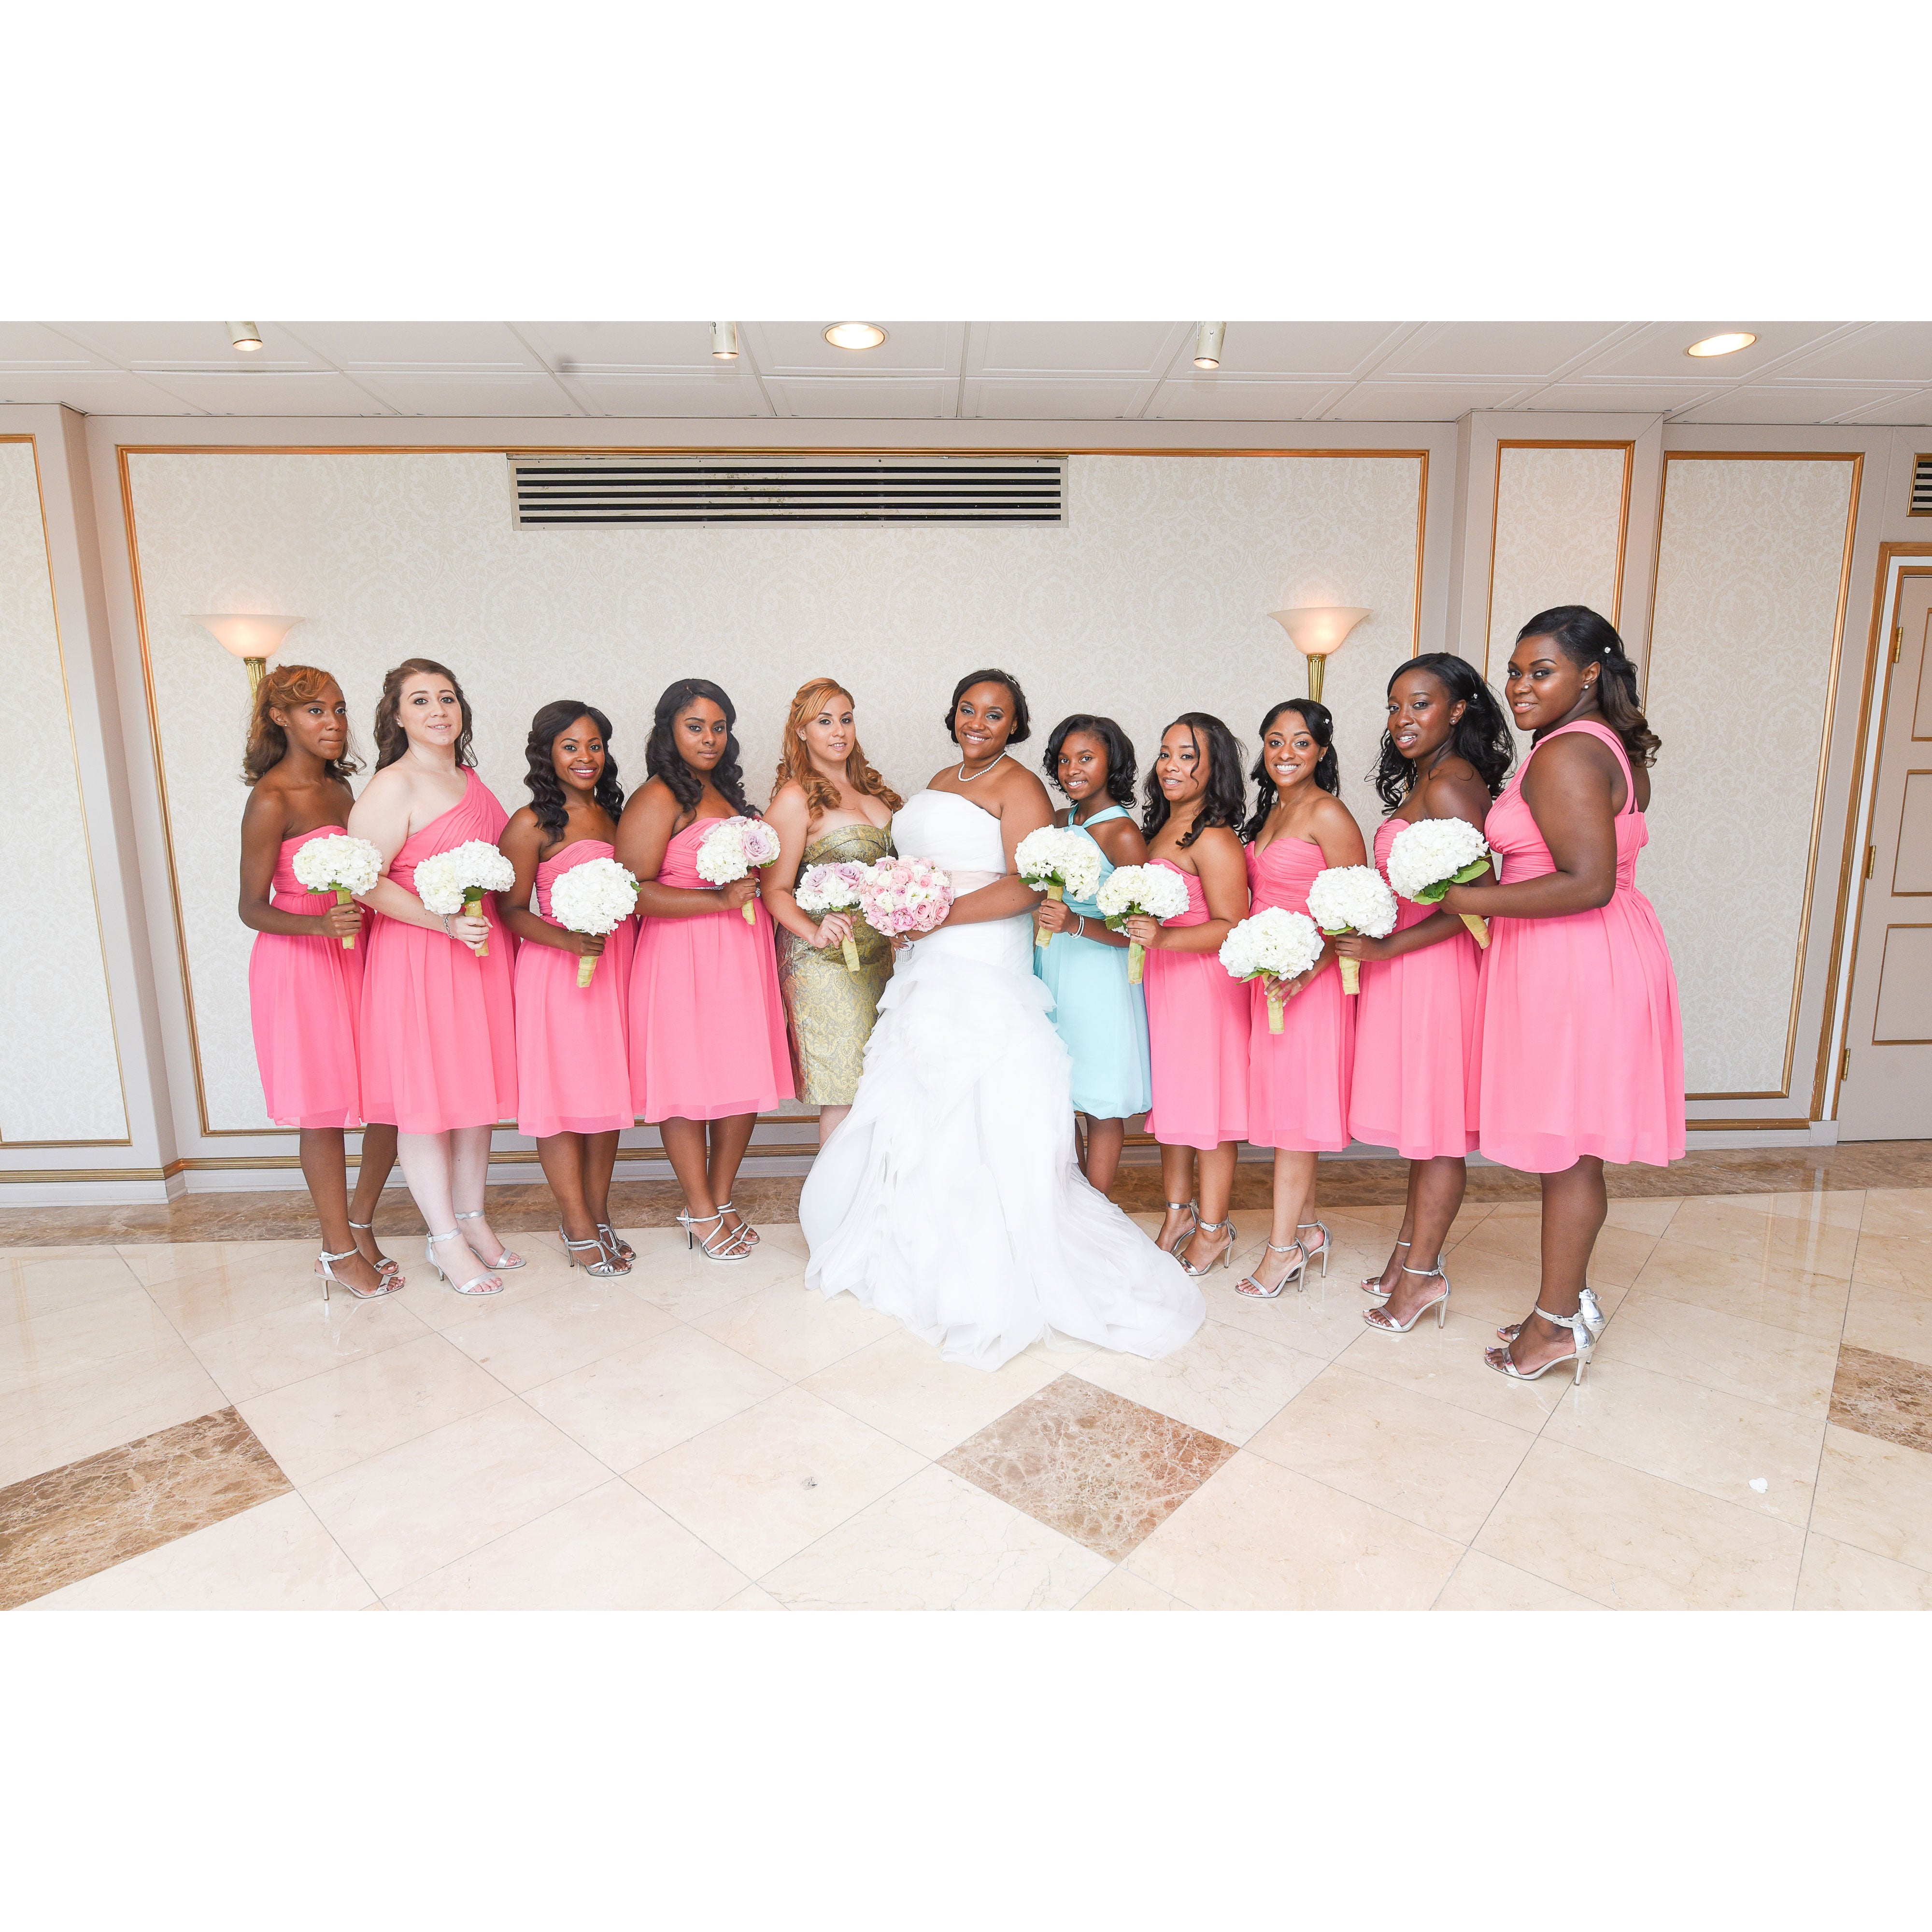 Bridal Bliss: Blaise and Nicole's Dreamy New York Wedding Style
